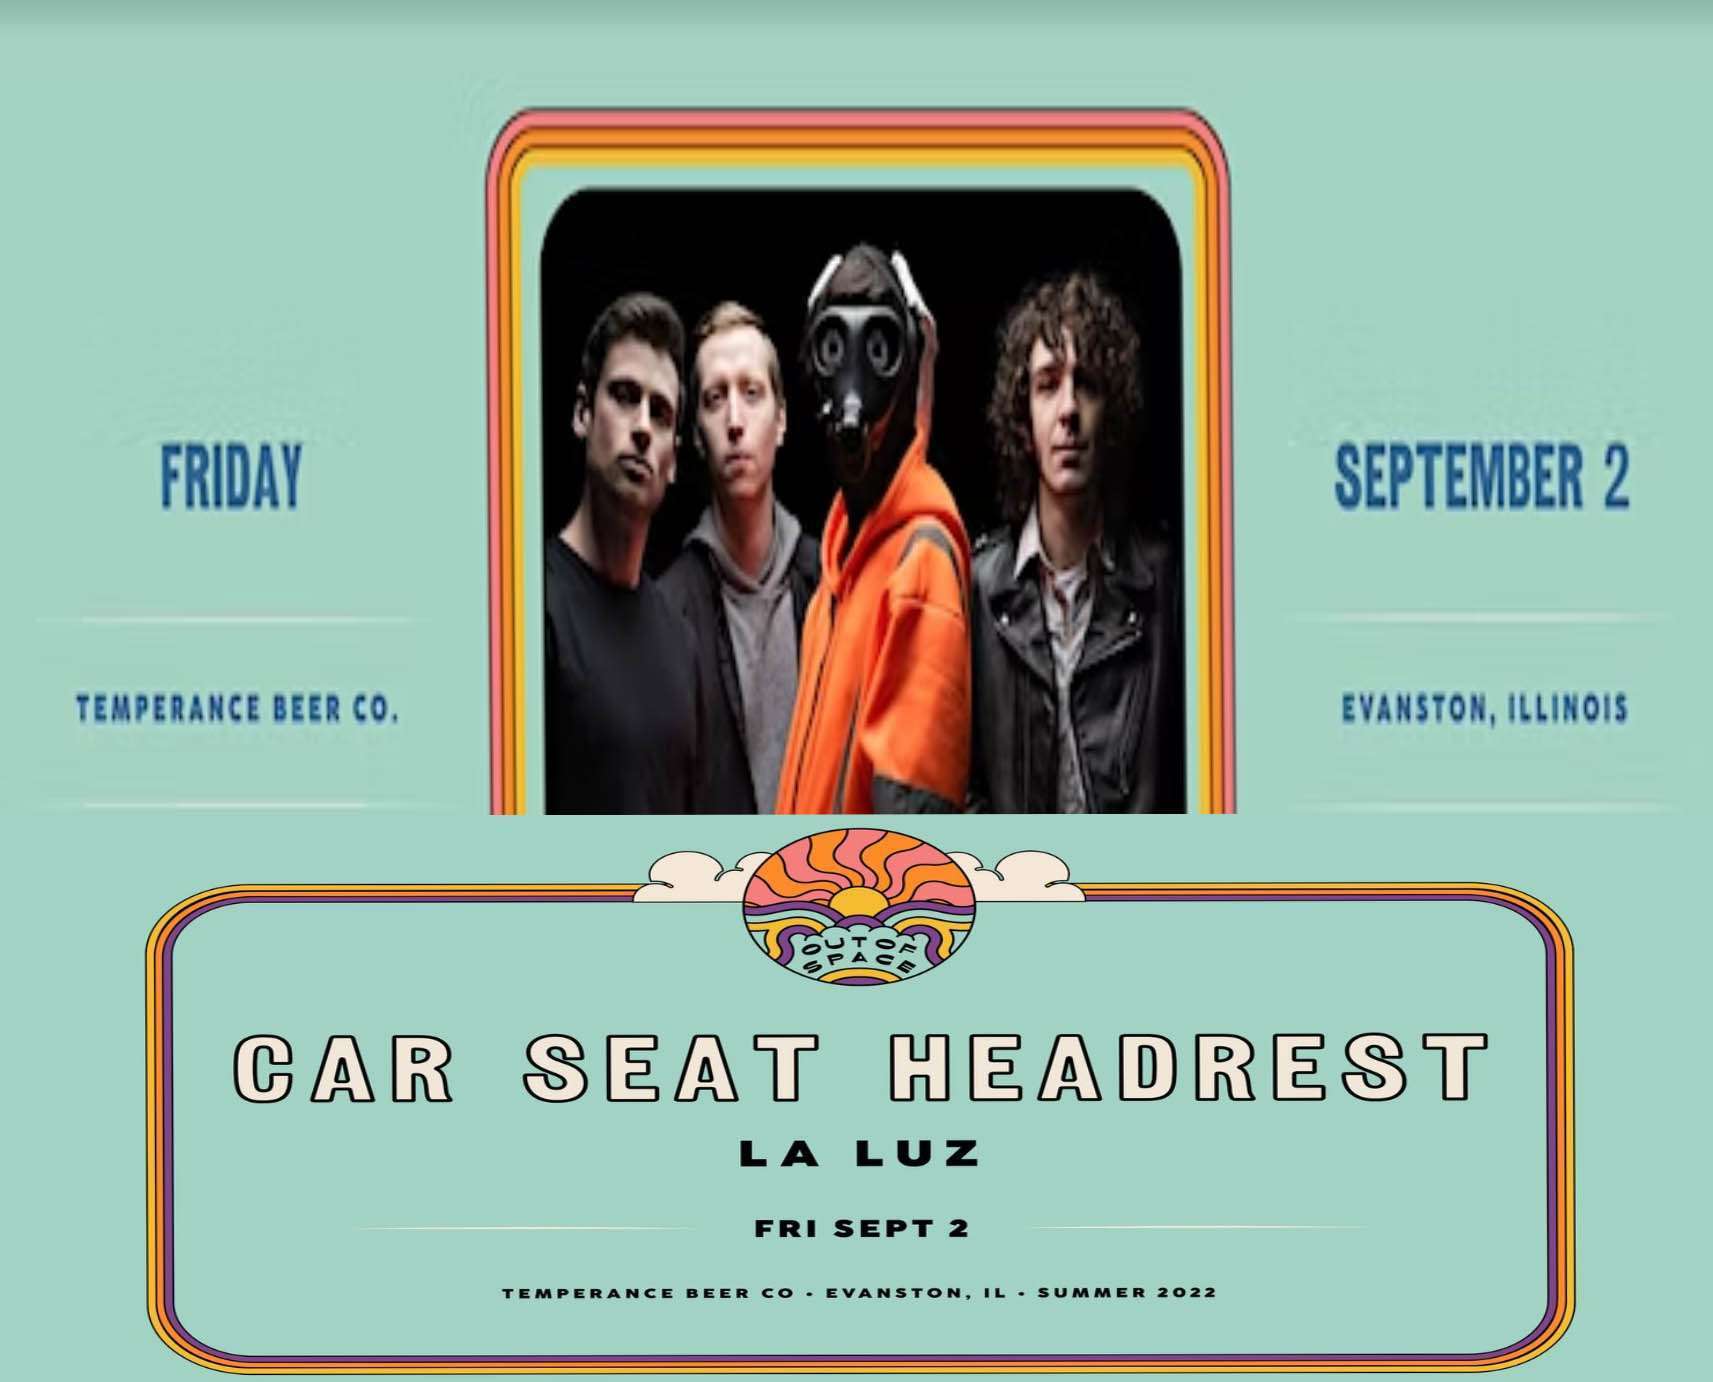 The Out of Space at Temperance : Car Seat Headrest with La Luz Music Event 2022